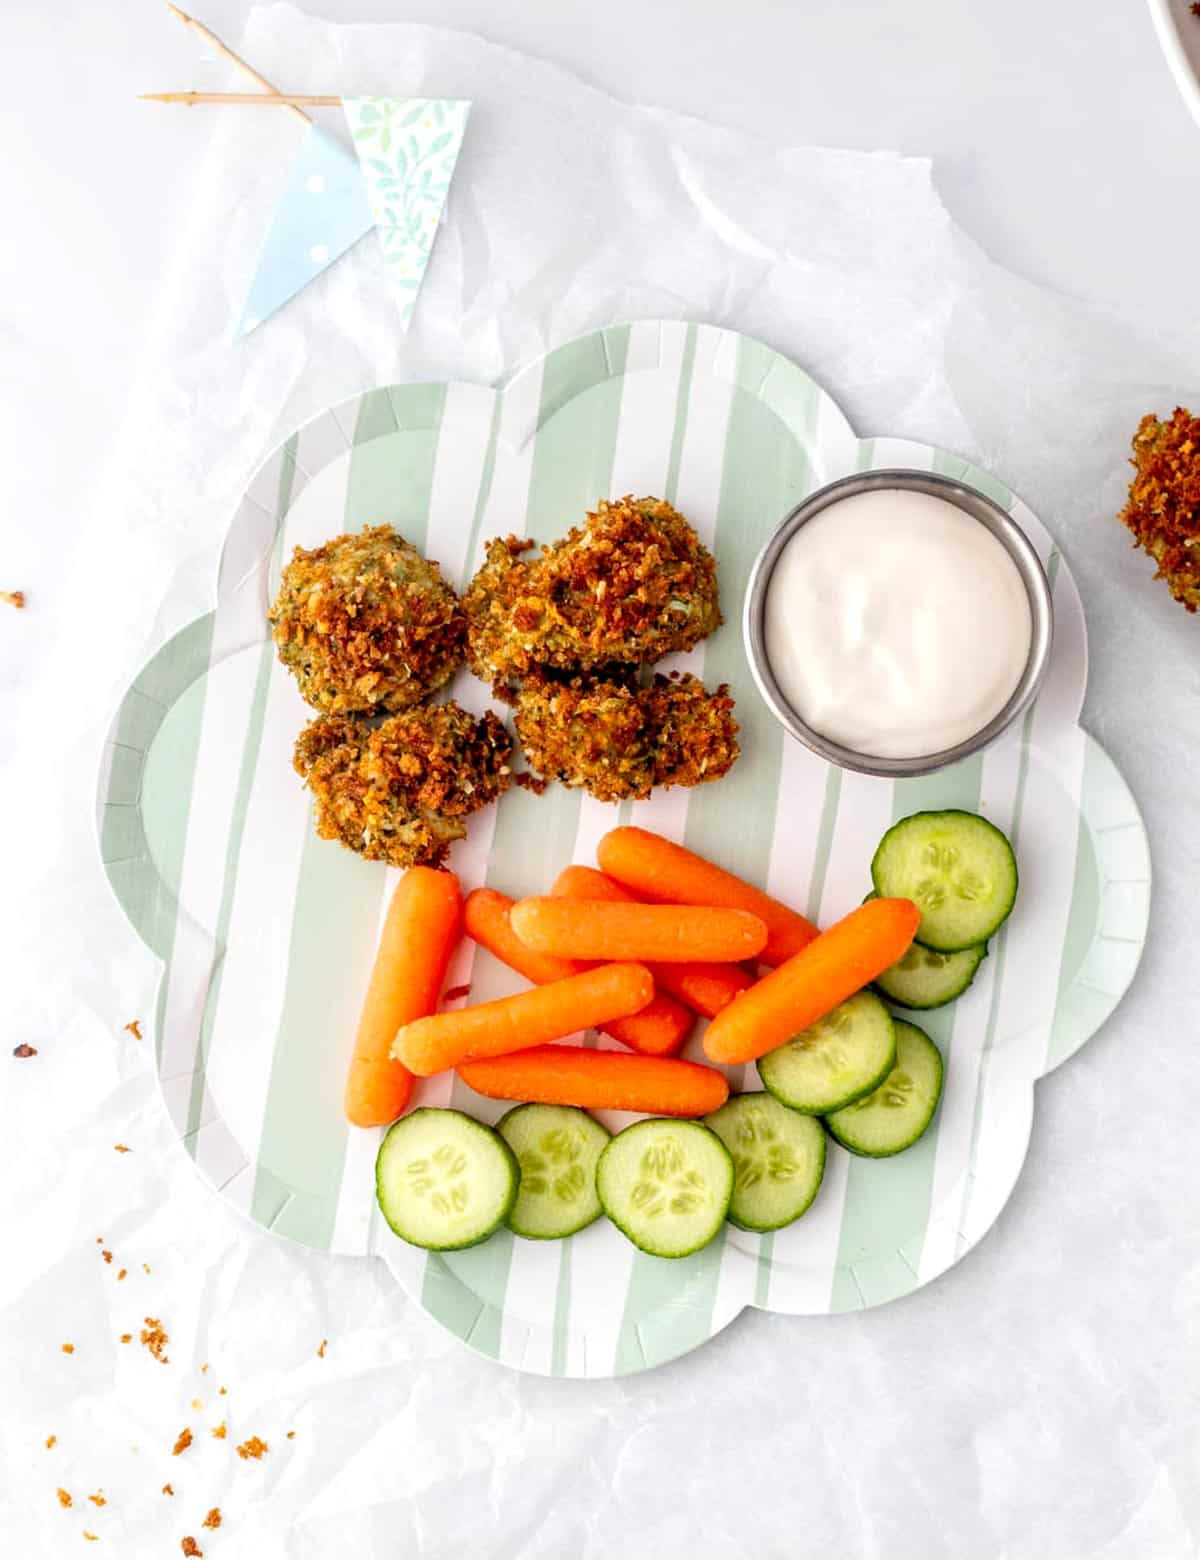 Four pesto chicken nuggets on a plate with raw veggies and dip.